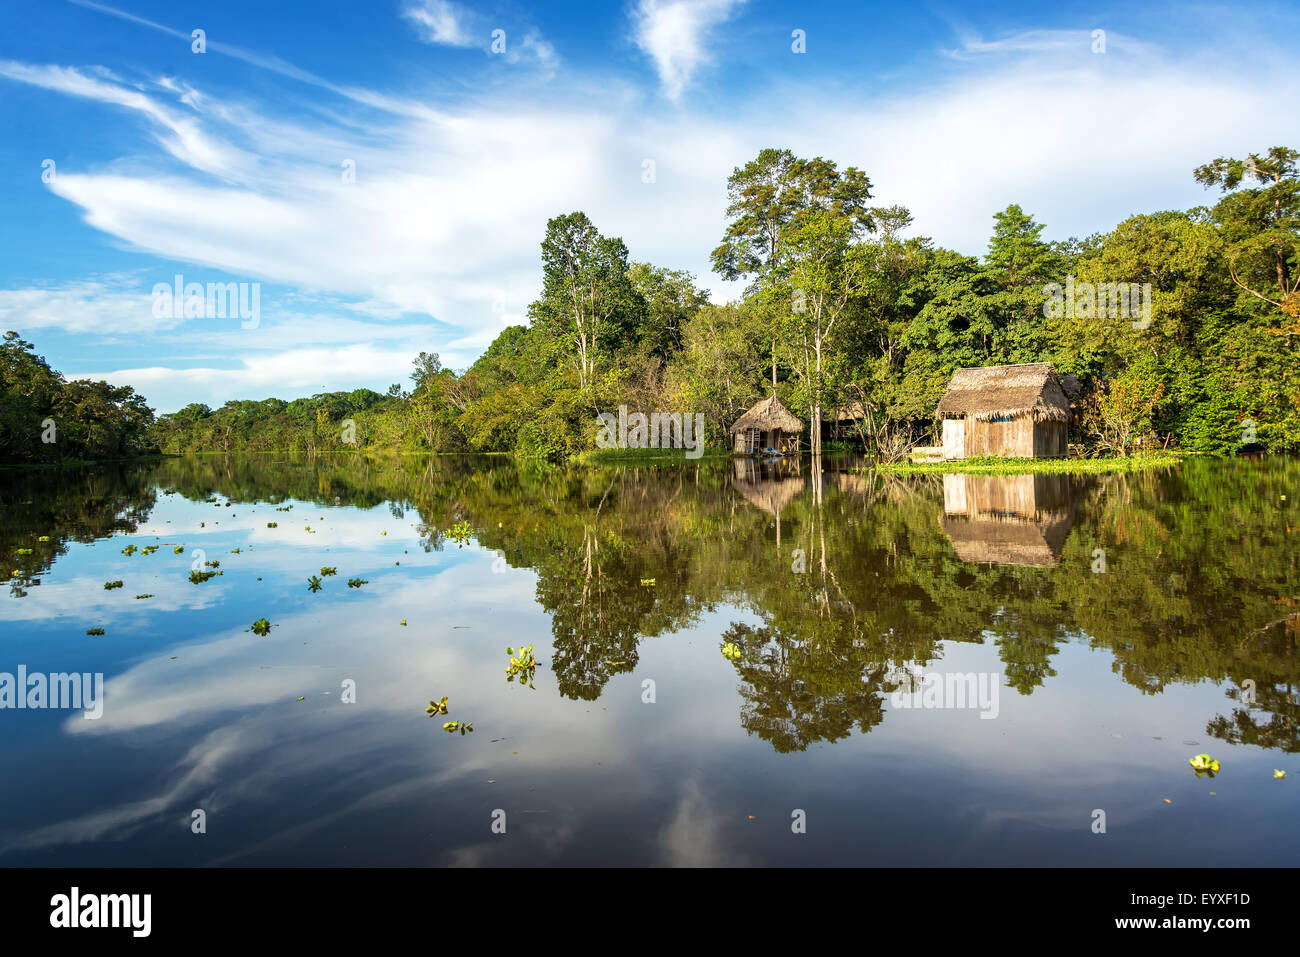 Small wooden shack in the Amazon rain forest with a beautiful reflection on the Yanayacu River near Iquitos, Peru Stock Photo